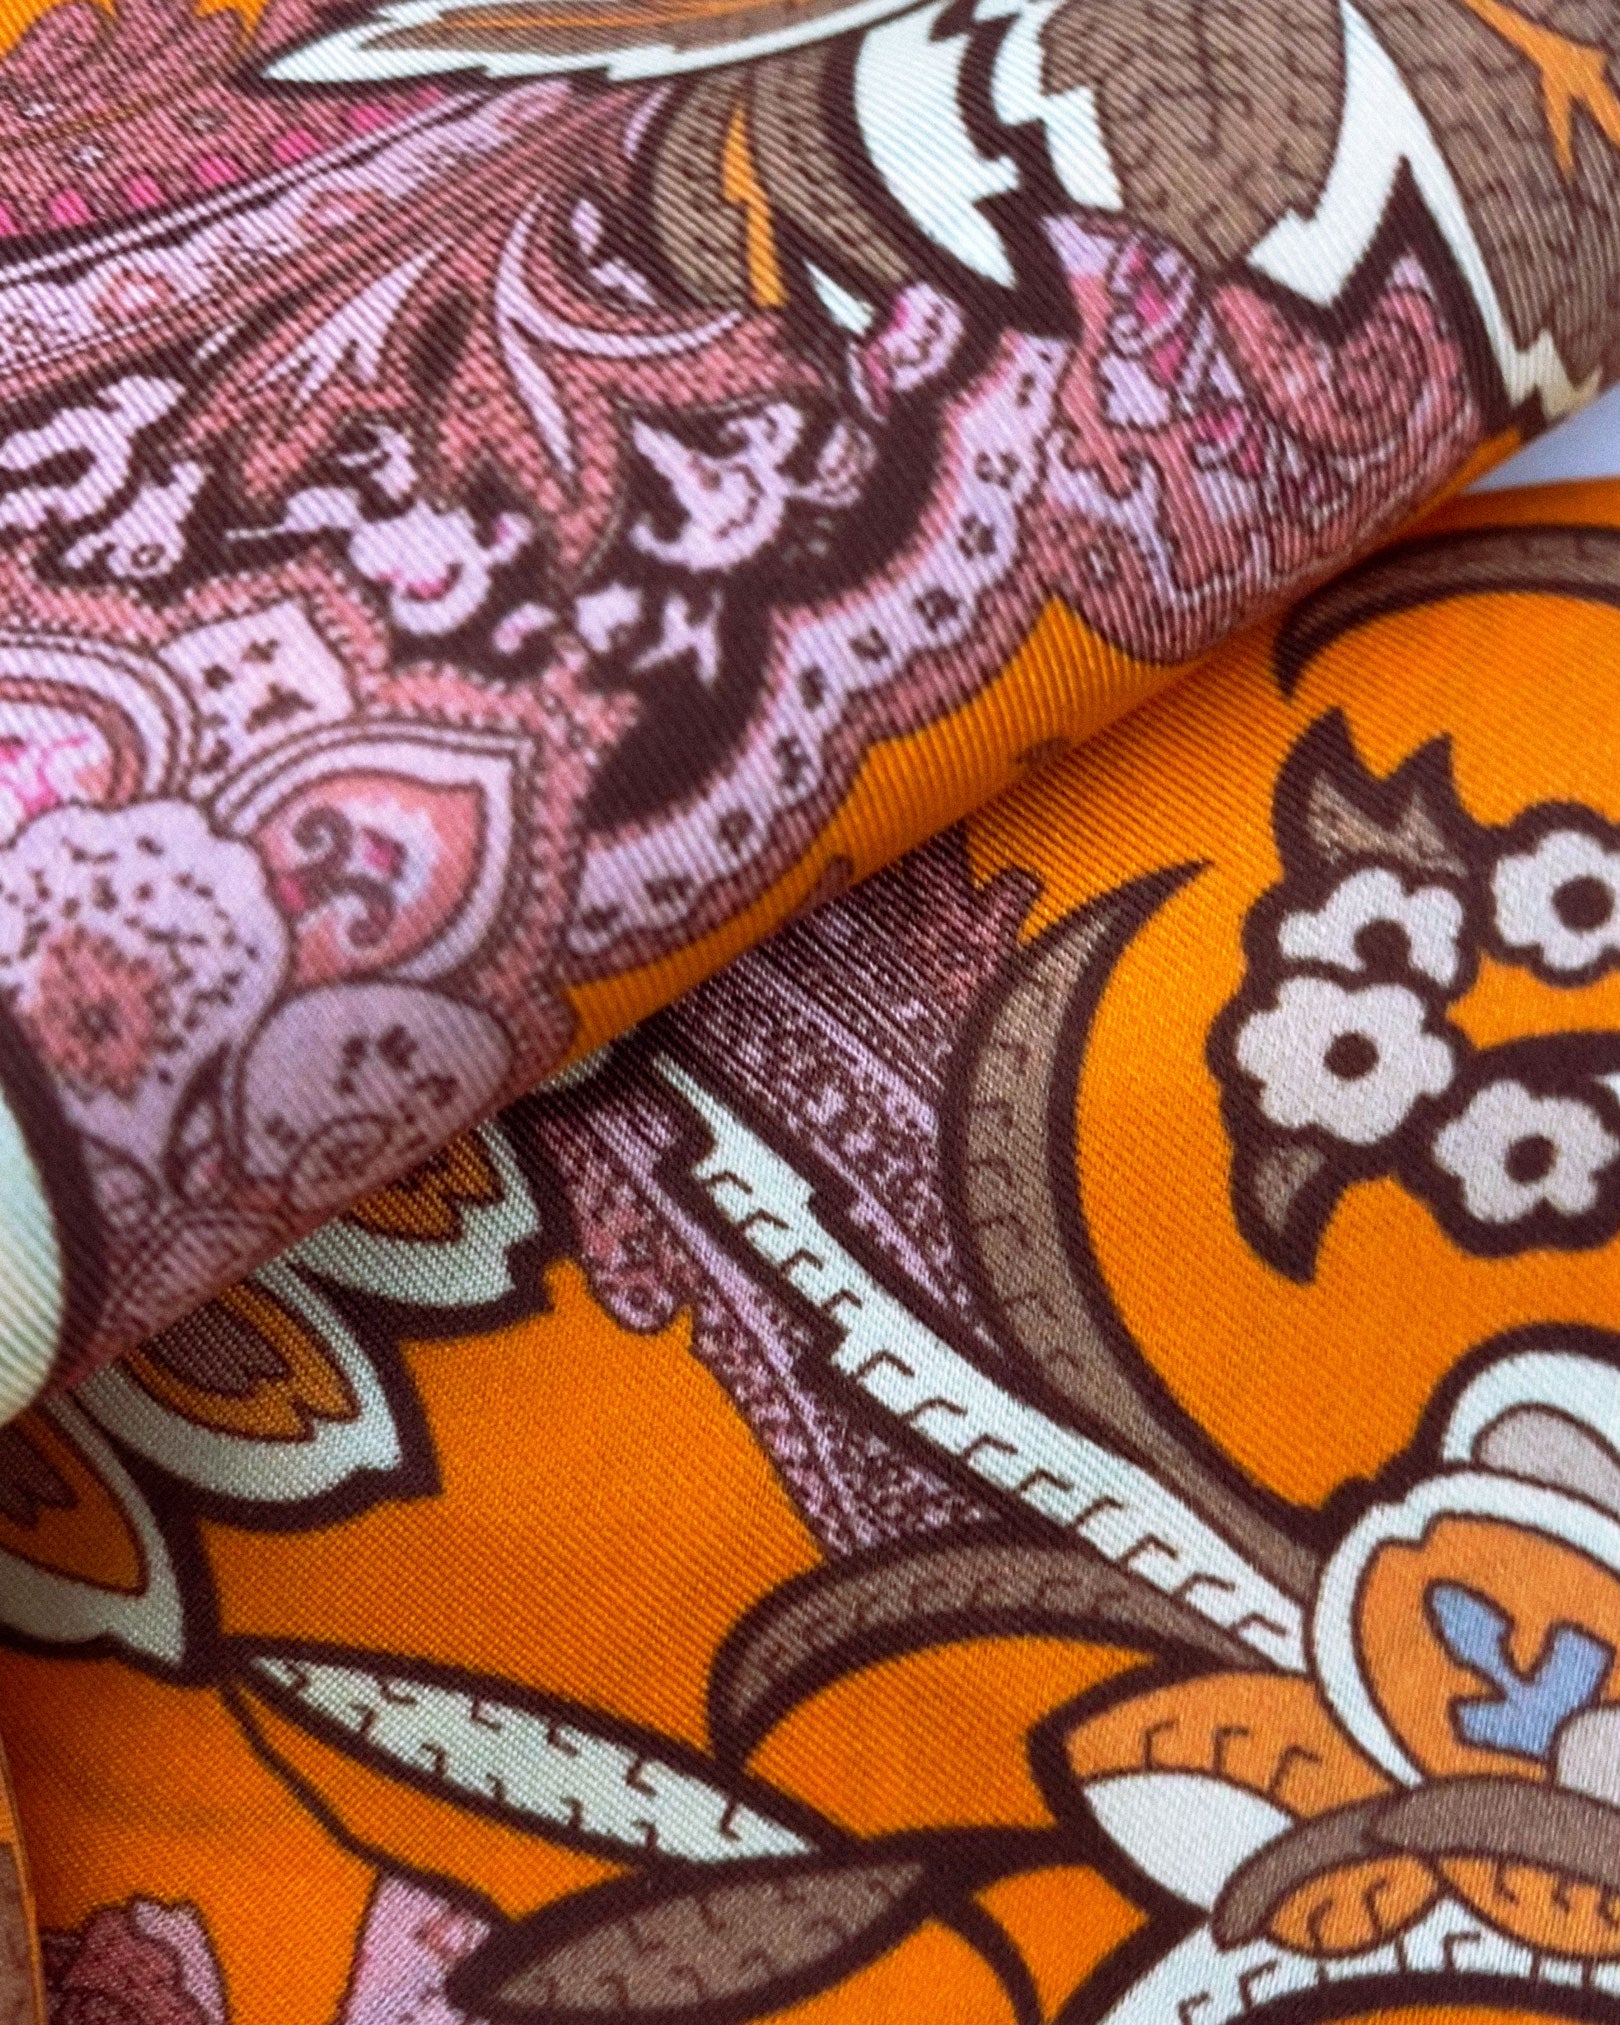 Ruffled close-up view of the Niagra silk scarf, presenting a closer view of the pink and orange floral-paisley leaves and flower repeats.